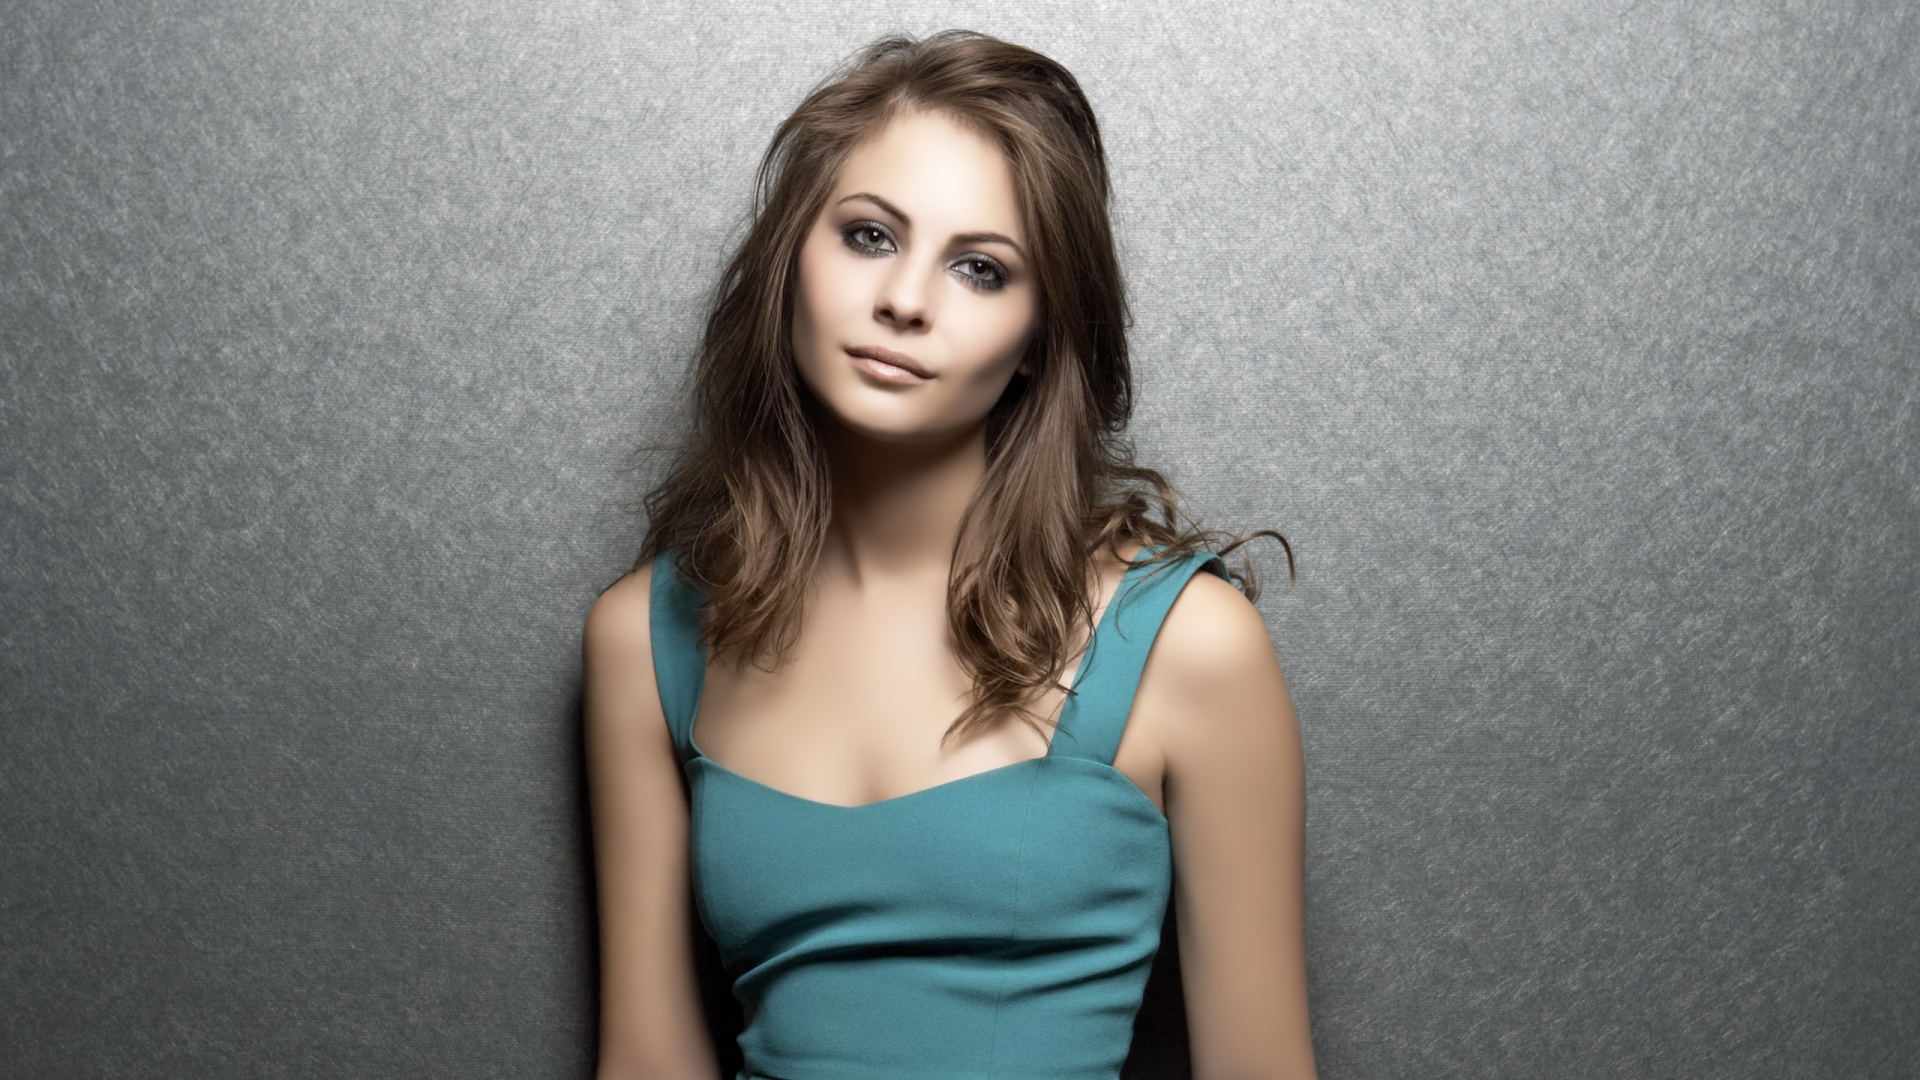 Sexy Willa Holland for 1920 x 1080 HDTV 1080p resolution